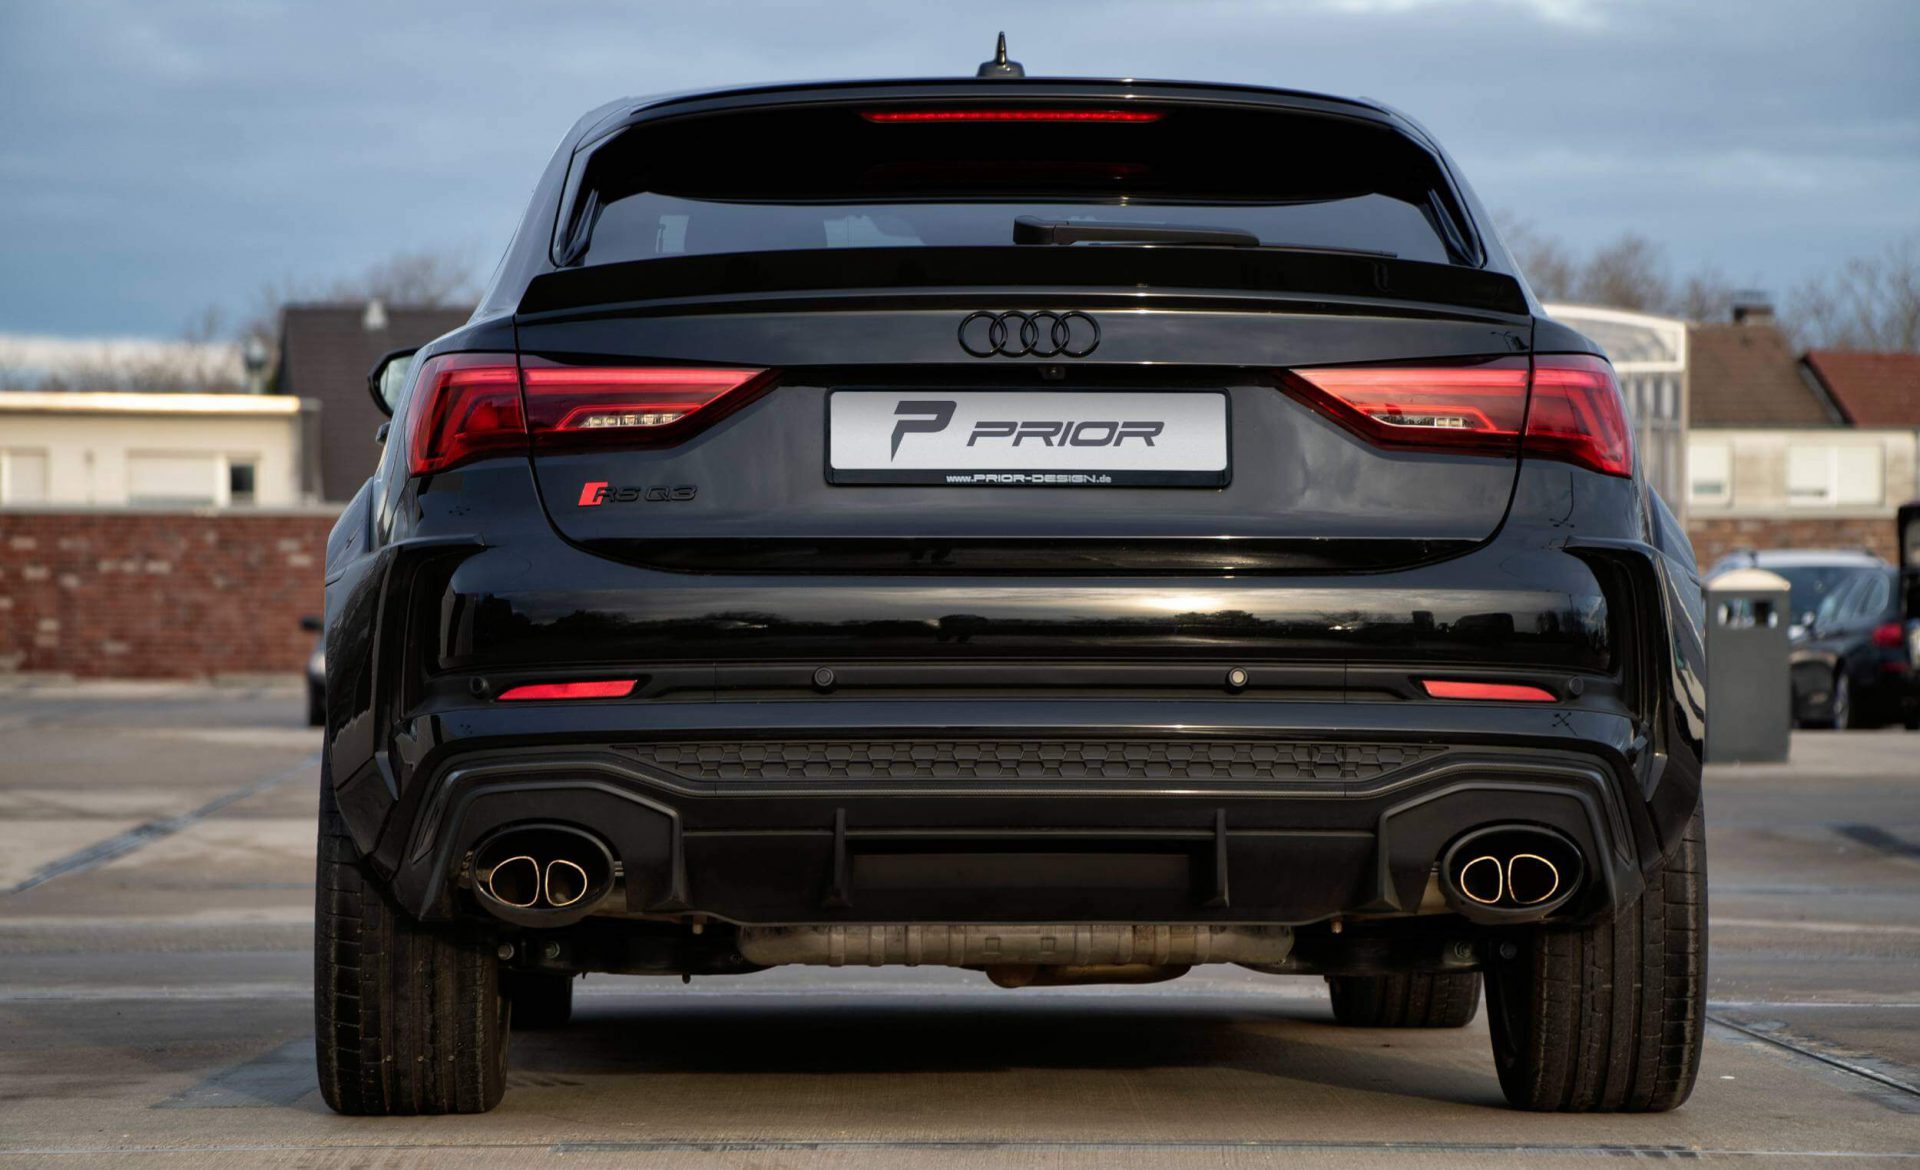 PD-RS400 Rear Trunk Spoiler for Audi RSQ3 Sportback [2019+]